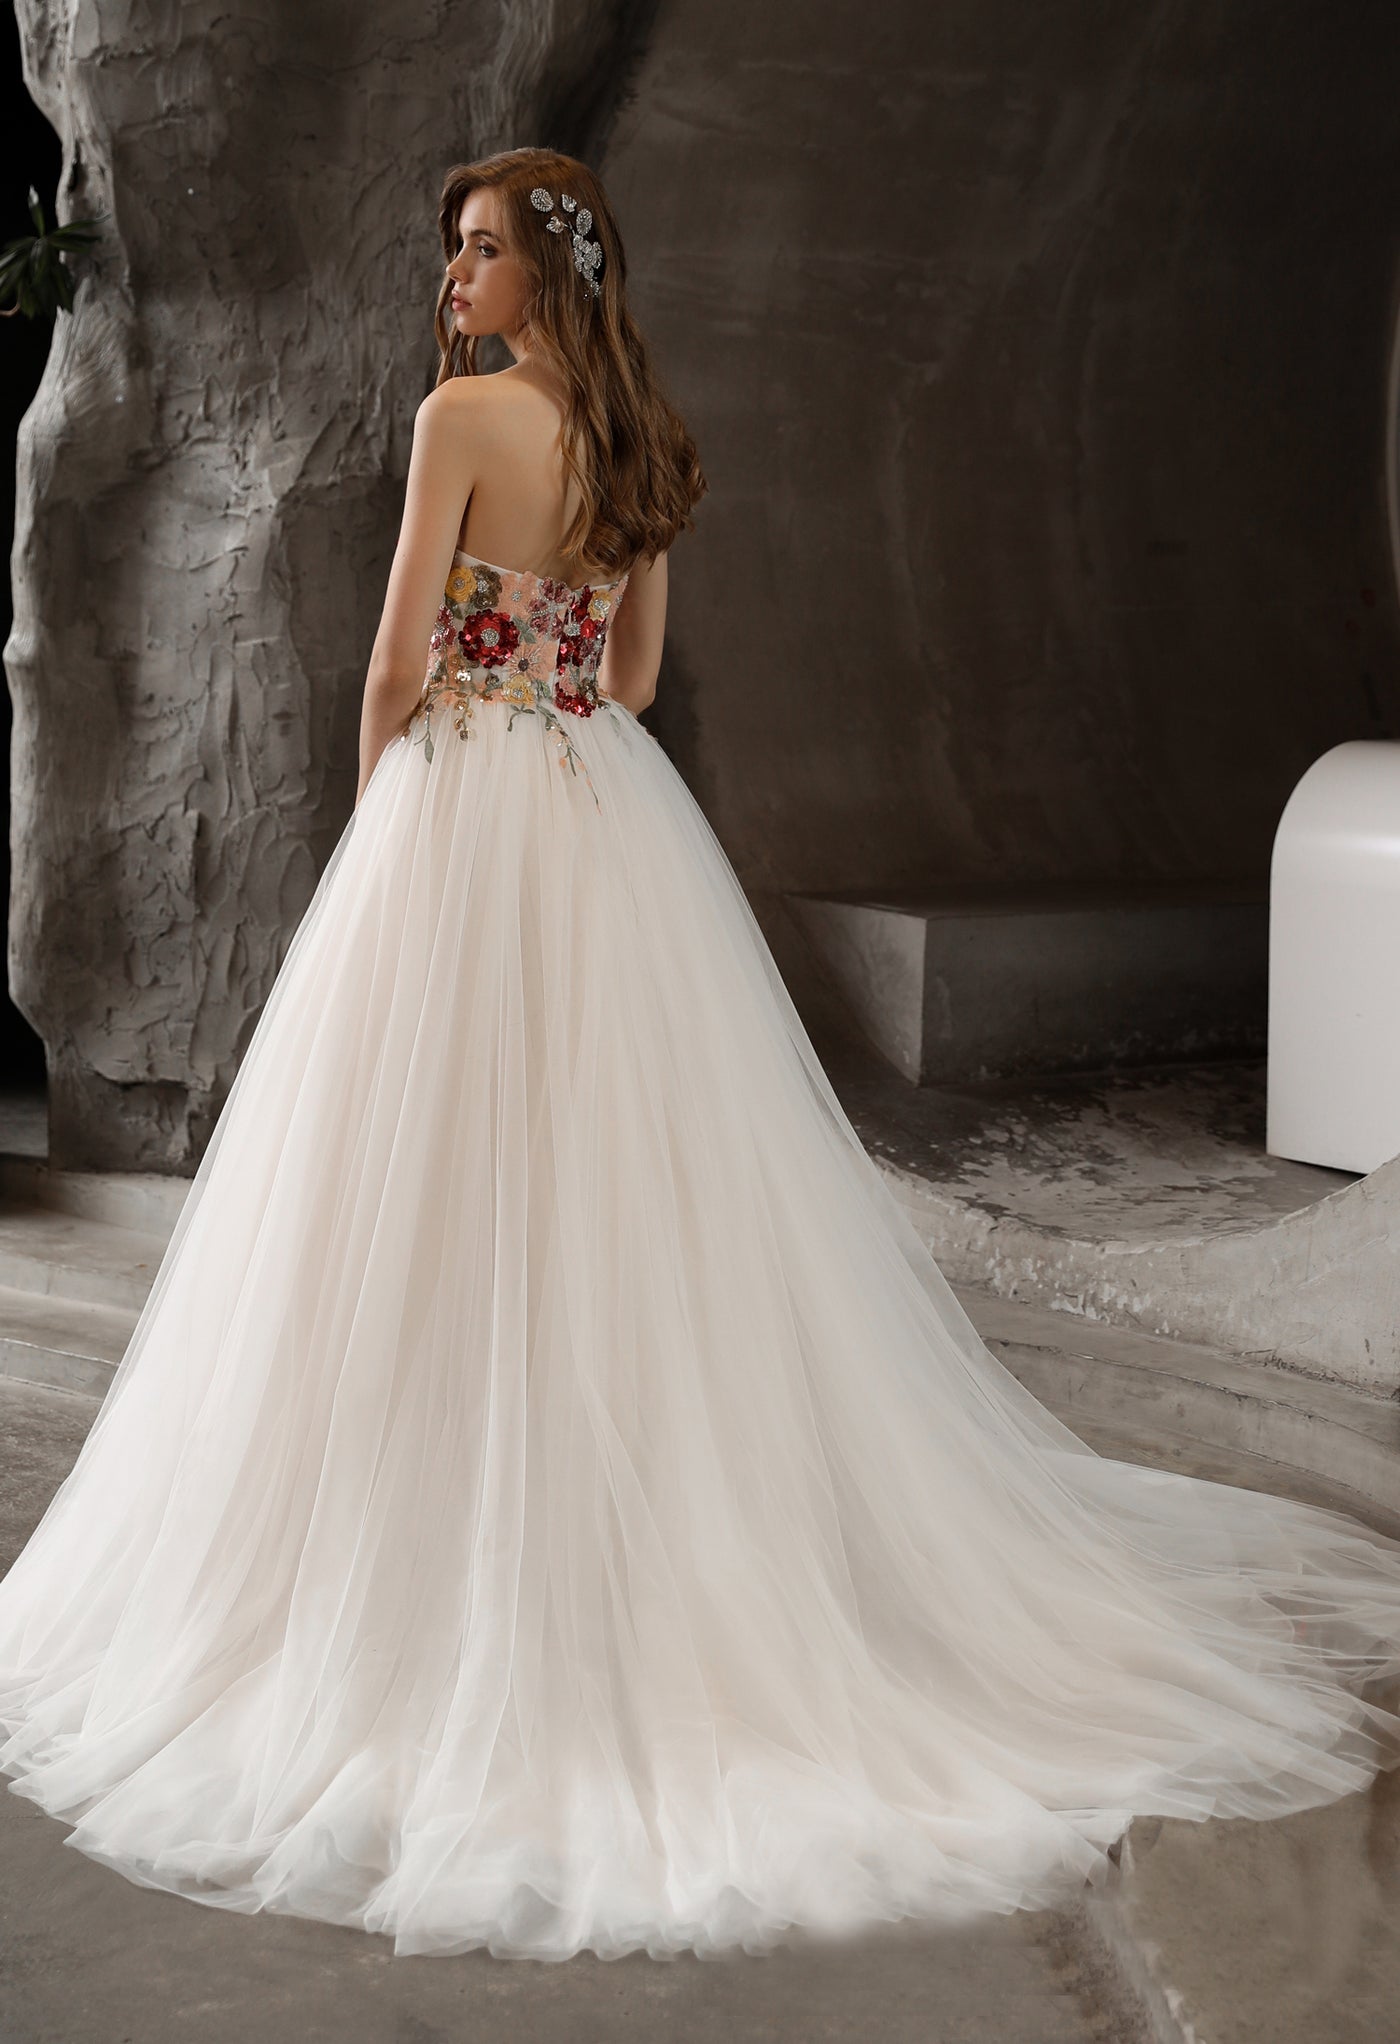 The back view of a woman in a Bergamot Bridal Strapless Princess A-line Bridal Gown with Tulle Skirt and Floral Beaded Bodice, at a bridal shop in London.